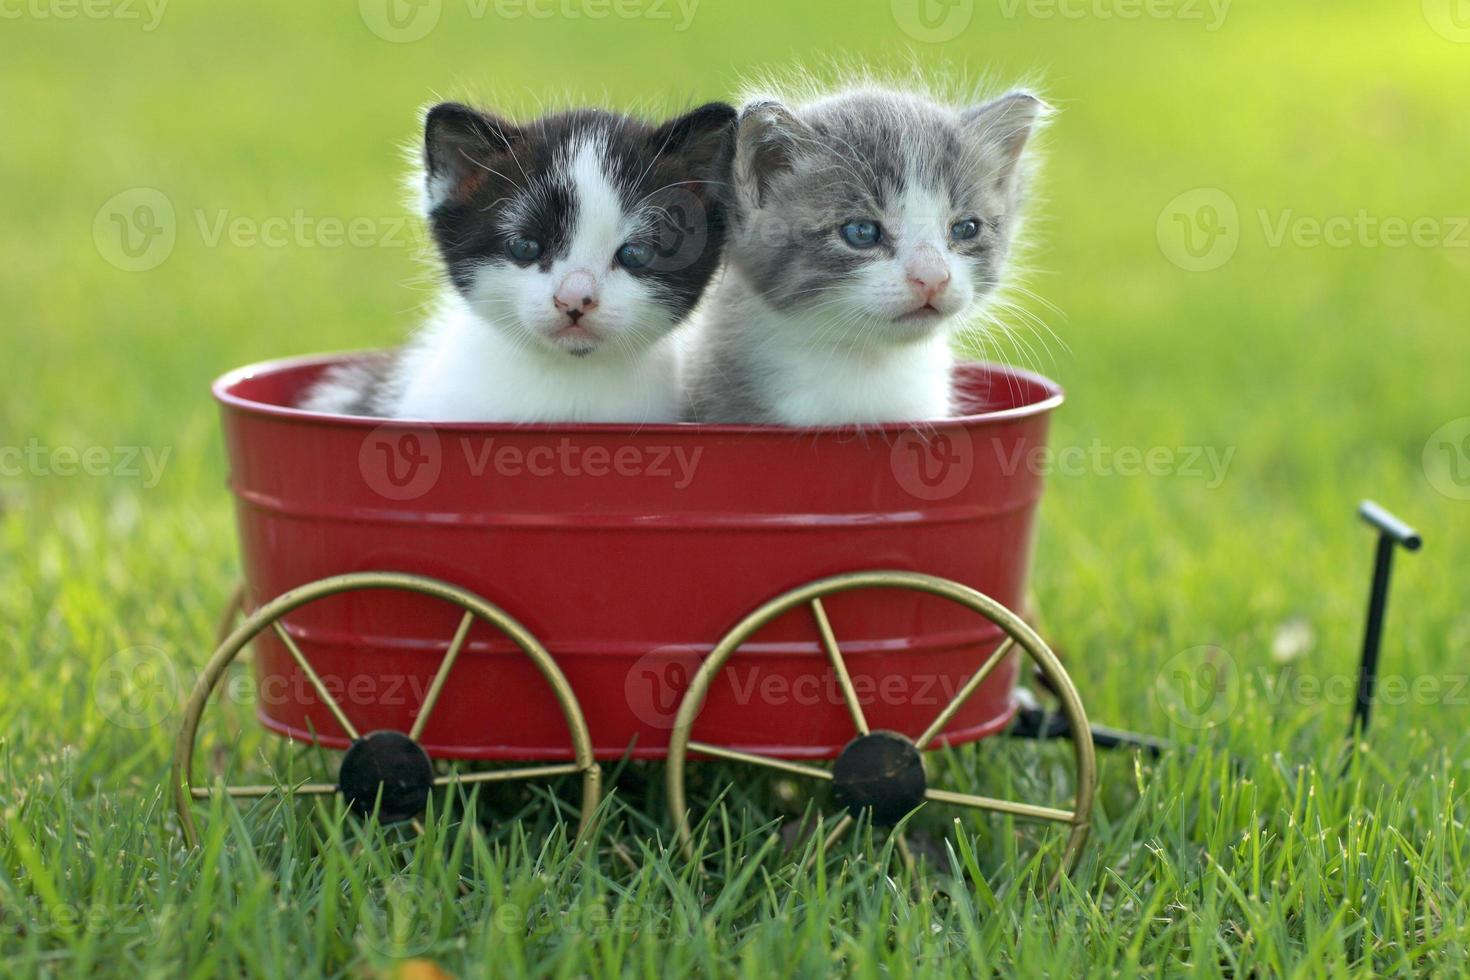 Kittens Outdoors in Natural Light photo